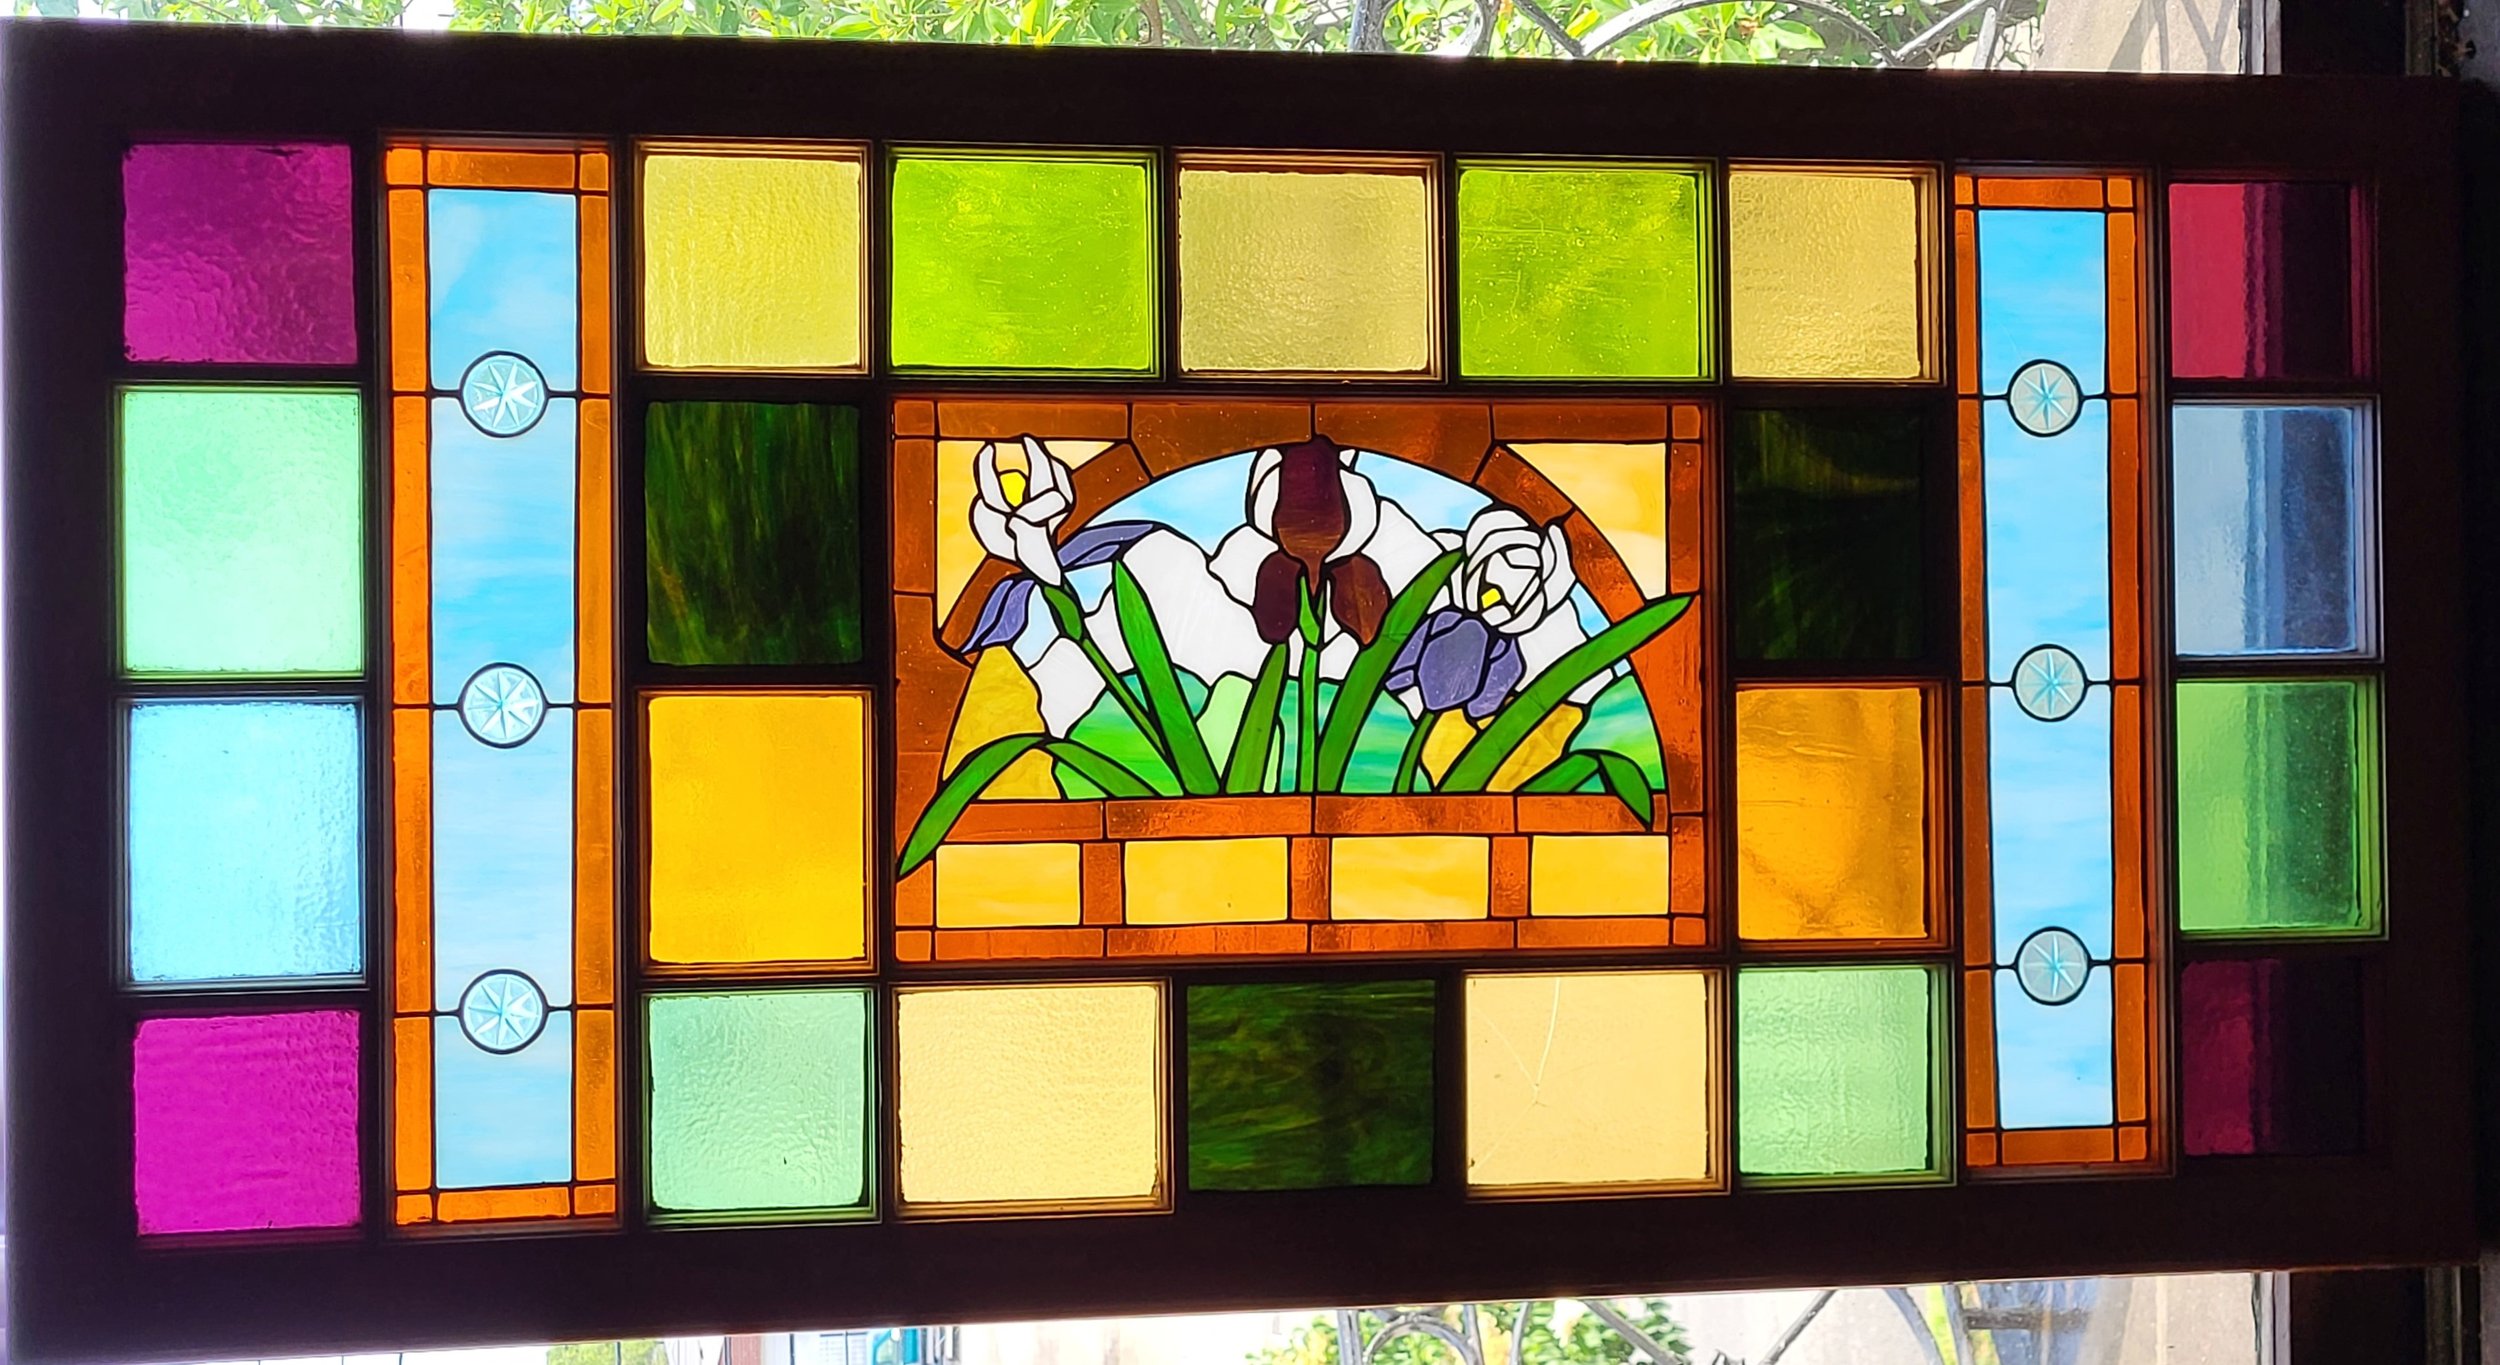 English Stained Glass Window- Green and Yellow - Dead People's Stuff  Architectural Antiques + Design